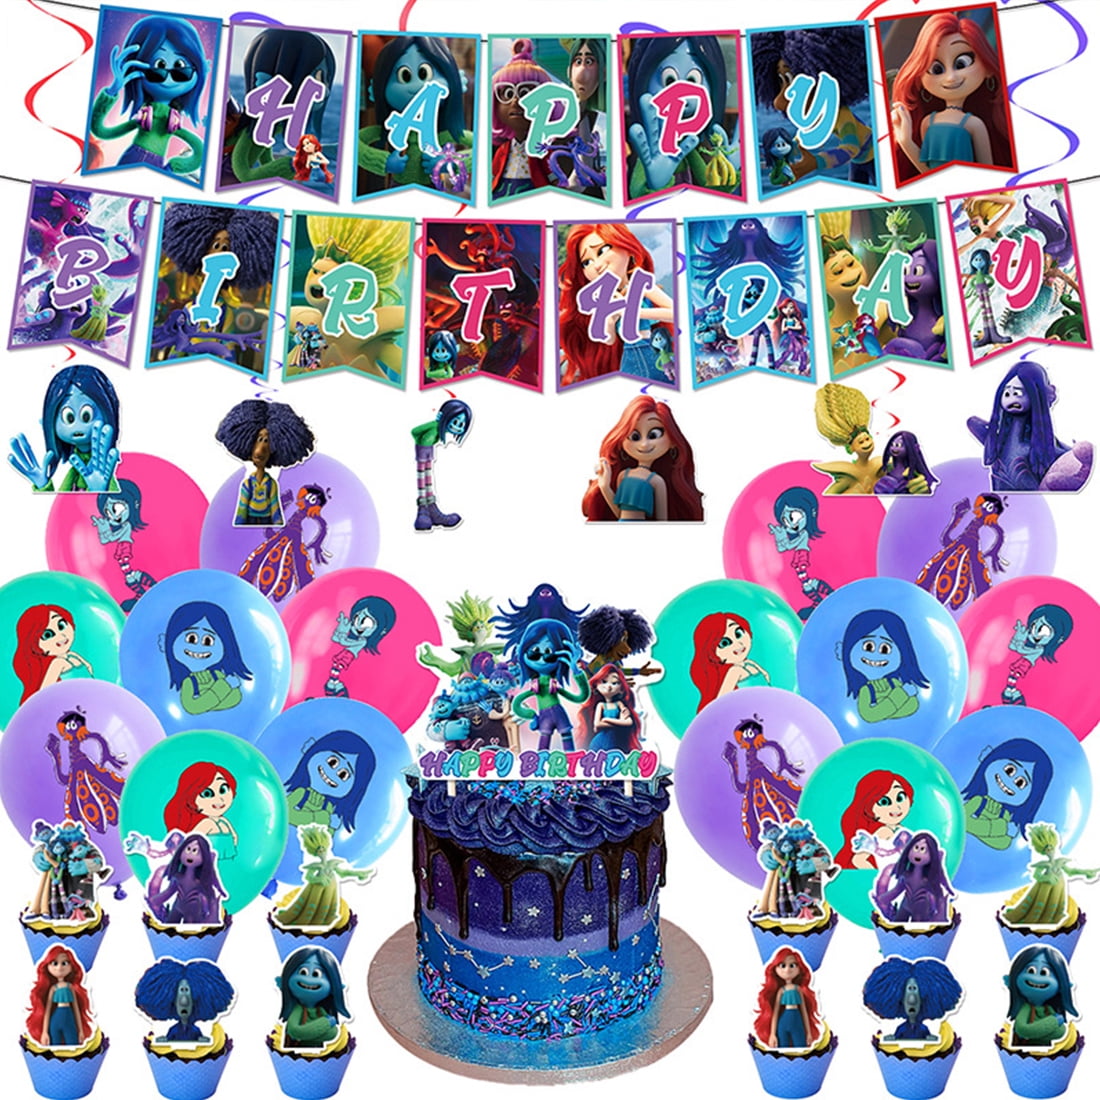 Gorilla Tag Popular Game Theme Happy Birthday Party Supplies, Include Banner,  Balloons Kit, Cake Topper, Cupcake Toppers, Decoration Set